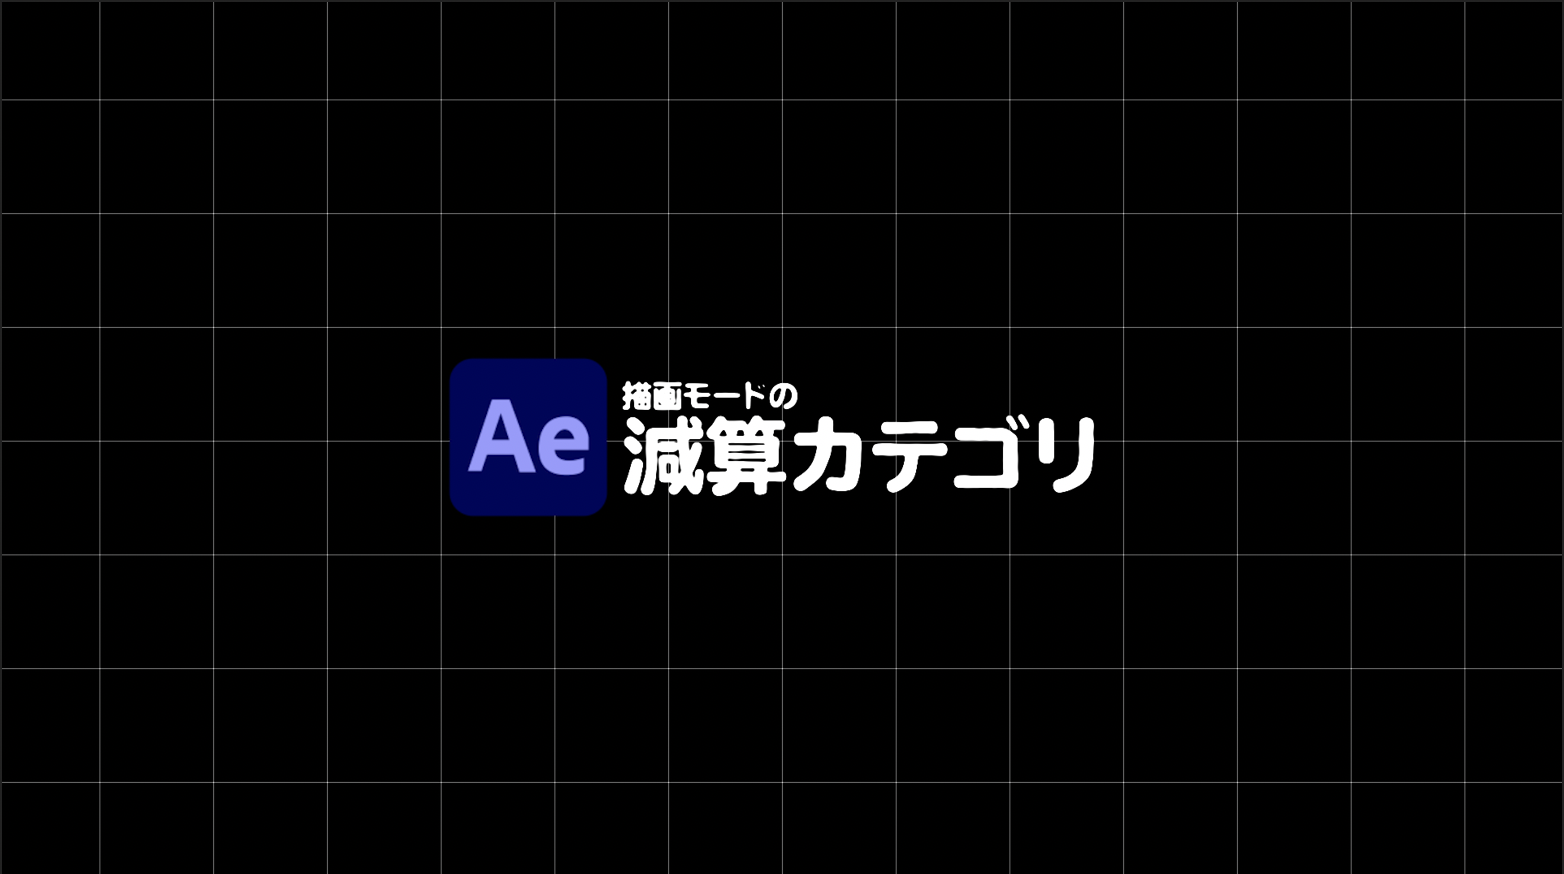 [After Effects]描画モードの減算処理とは？